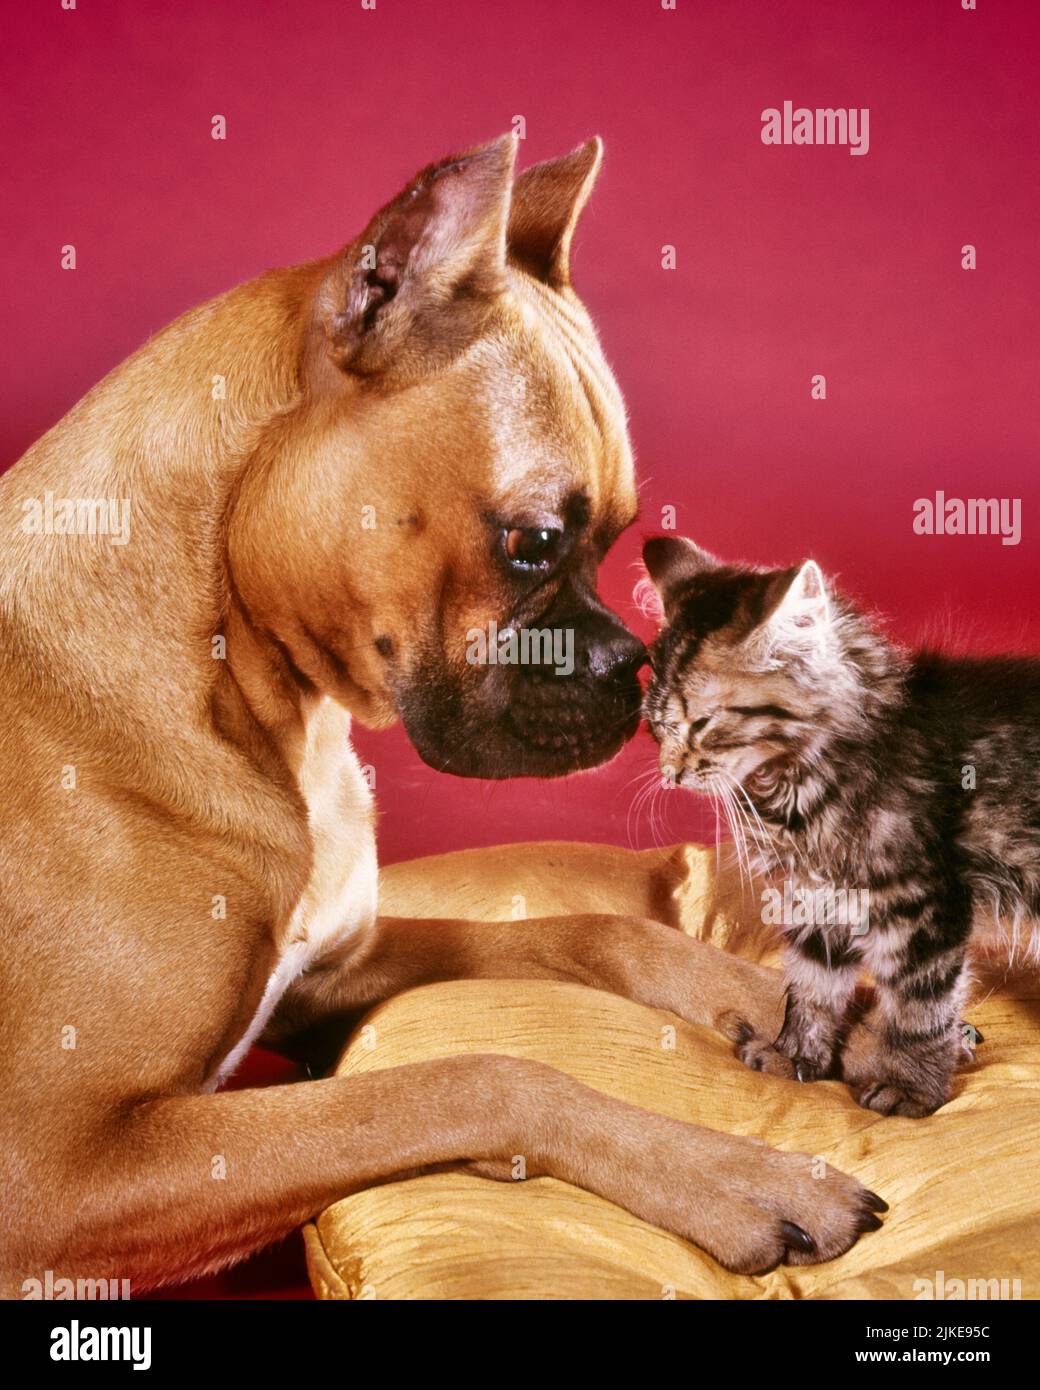 1960s BOXER DOG STARING AT HOUSE CAT KITTEN ON YELLOW CUSHION LOOKING SMELLING FACING CONFRONTING CURIOUS YOUNG BUDDY FRIEND - kd3520 PHT001 HARS STUDIO SHOT HOME LIFE FACING COPY SPACE FRIENDSHIP HALF-LENGTH INSPIRATION PETS HUMOROUS OCCUPATION STARING MAMMALS HIGH ANGLE CANINES FELINE COMICAL POOCH COMEDY CURIOUS FRIENDLY FELINES ANIMALS DOGS CANINE CONFLICTING CREATURE KITTY MAMMAL YOUNGSTER BATTLING BUDDY CATS AND DOGS CUSHION OLD FASHIONED Stock Photo